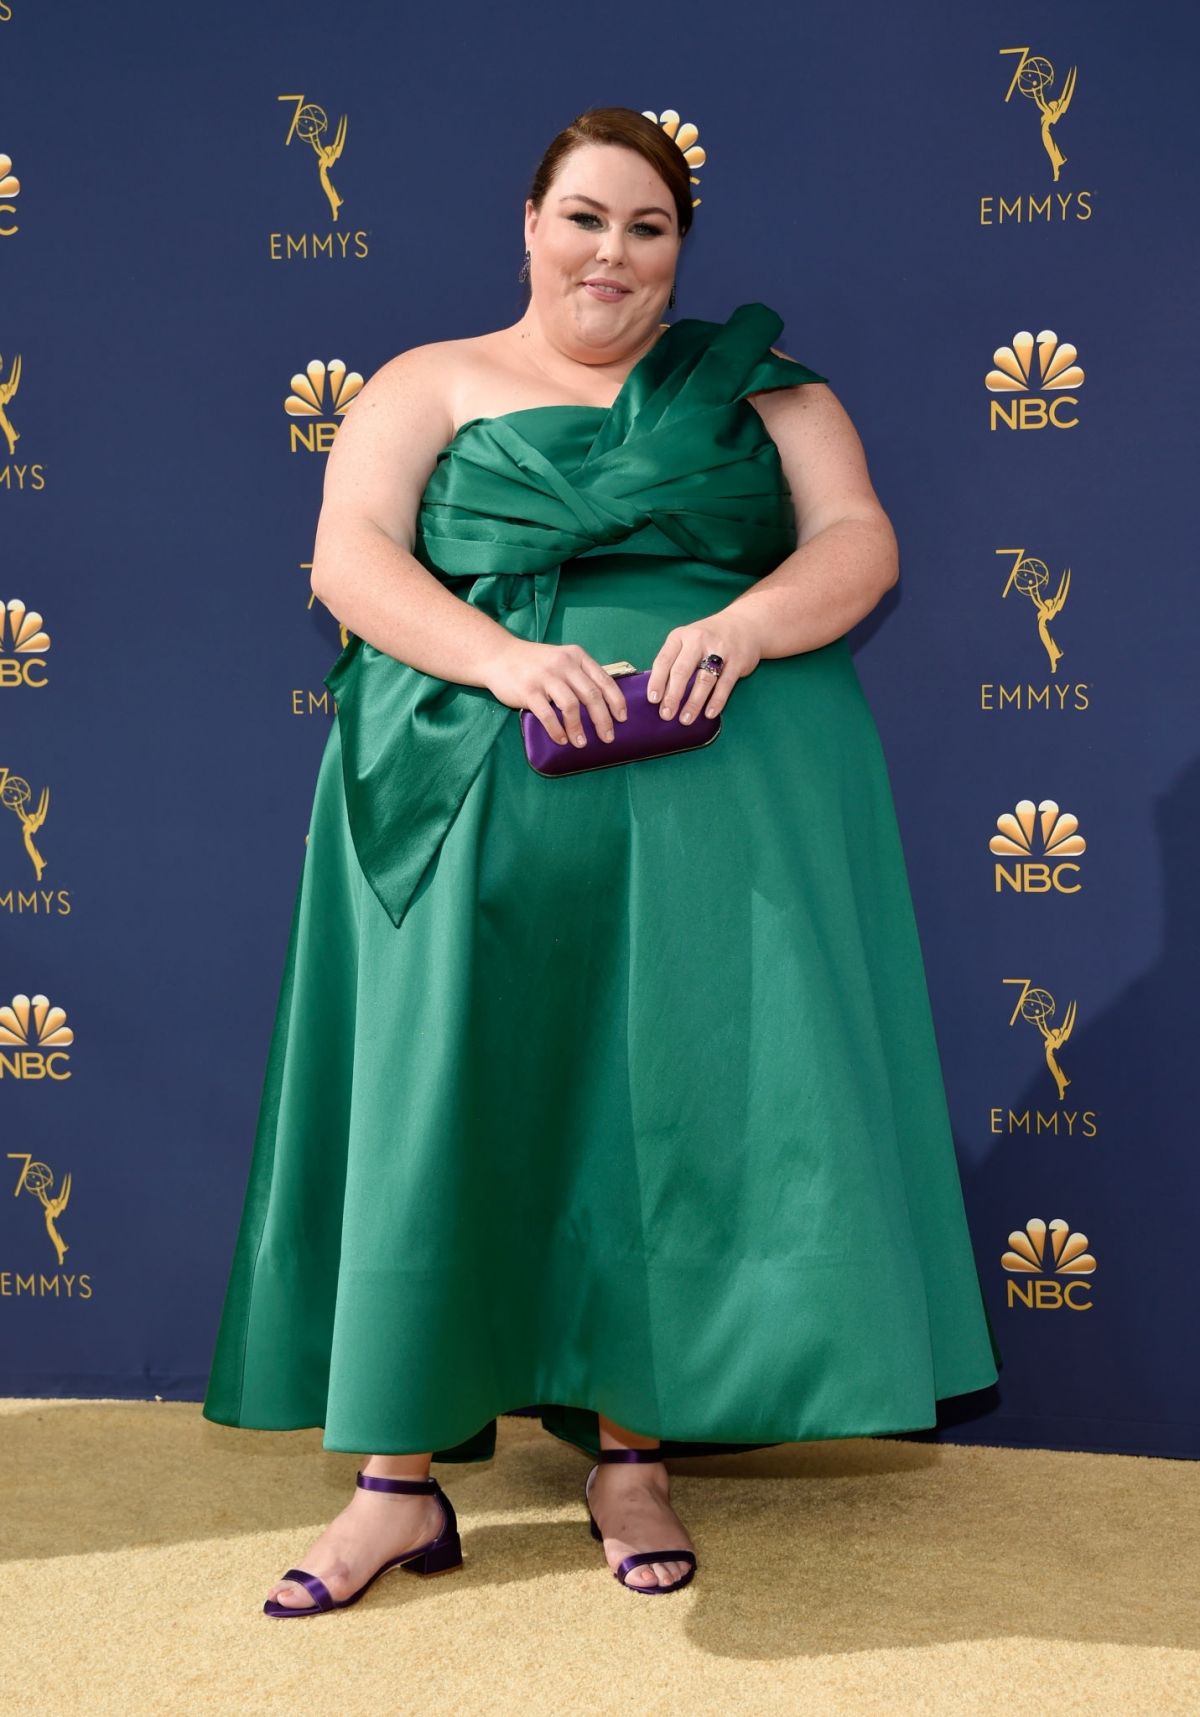 CHRISSY METZ at Emmy Awards 2018 in Los Angeles 09/17/2018 – HawtCelebs